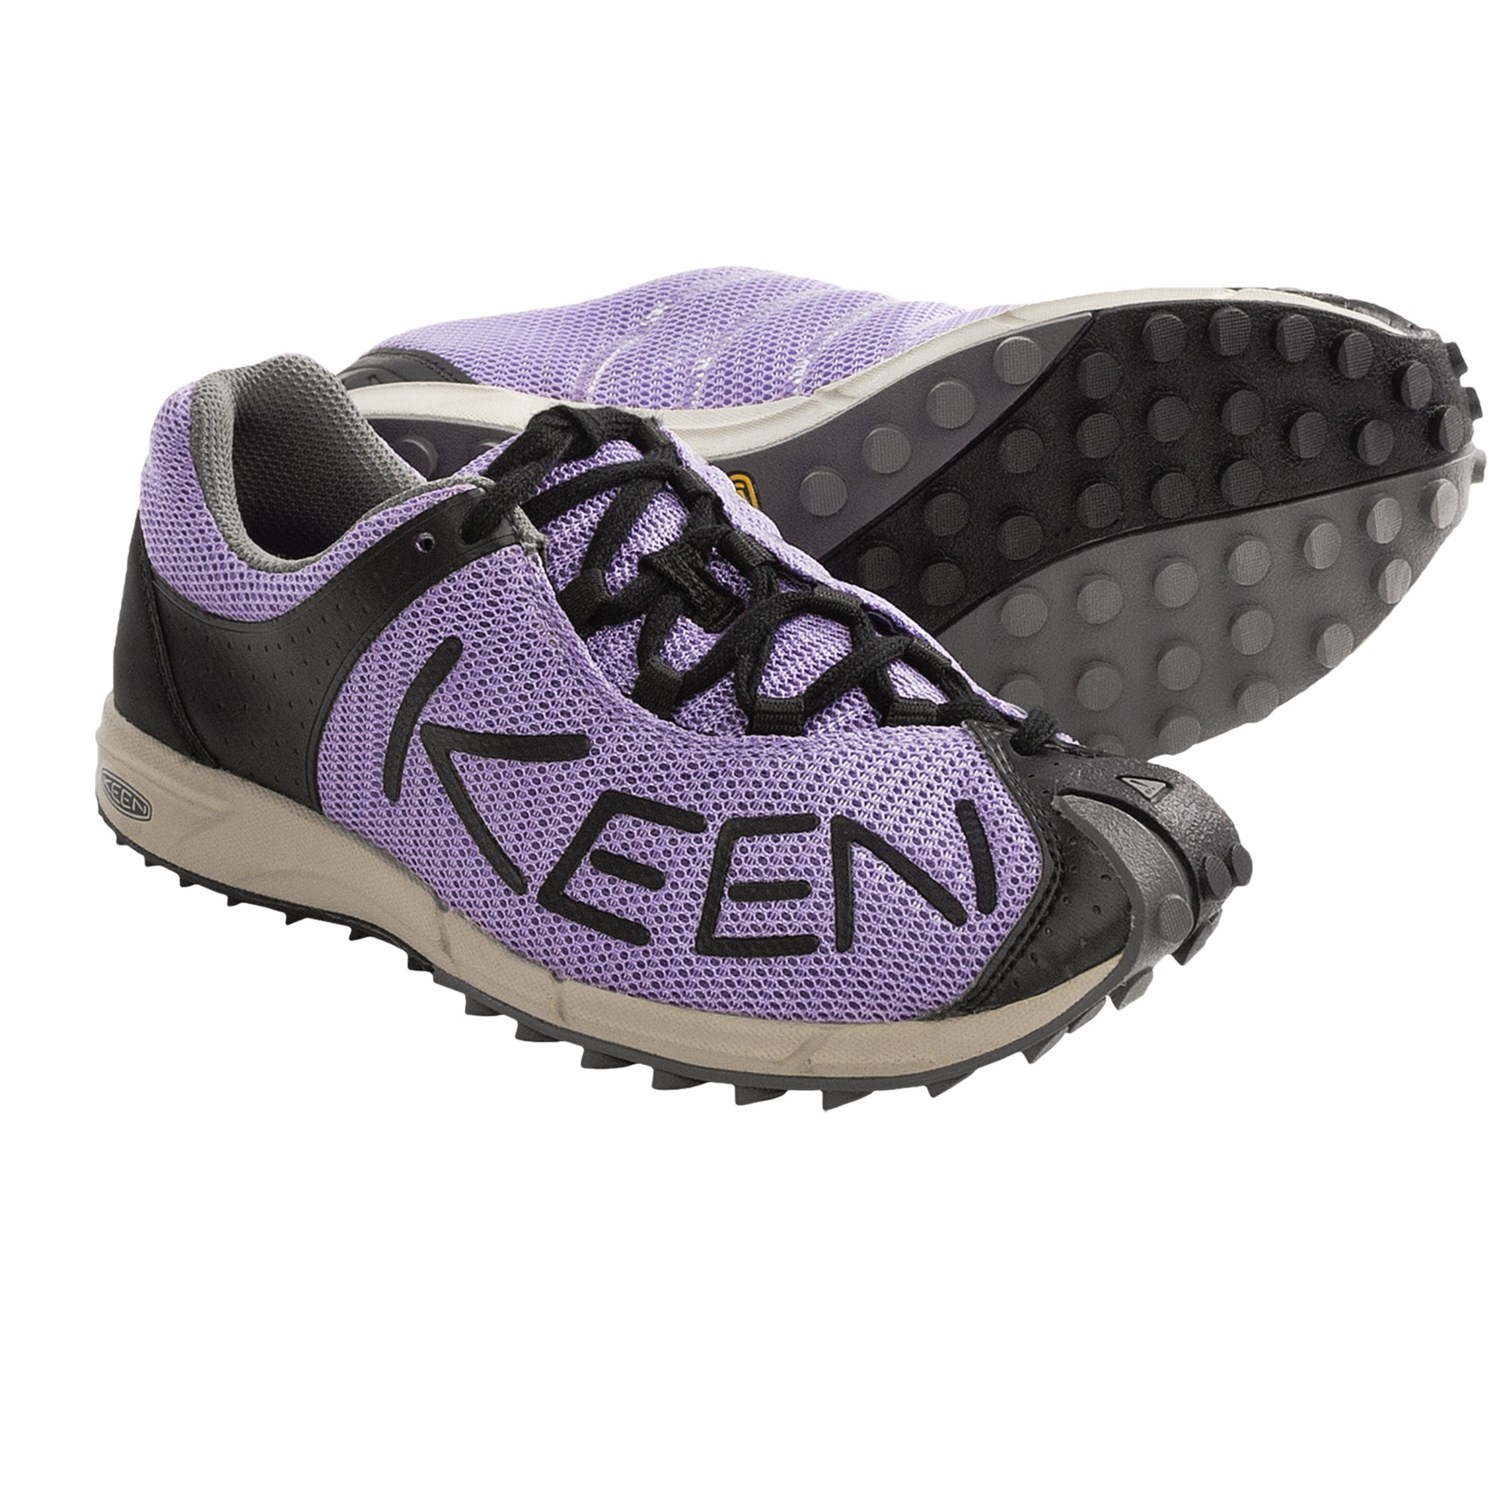 Keen A86 TR Trail Running Shoes (For Women) in BougainvilleaBlack